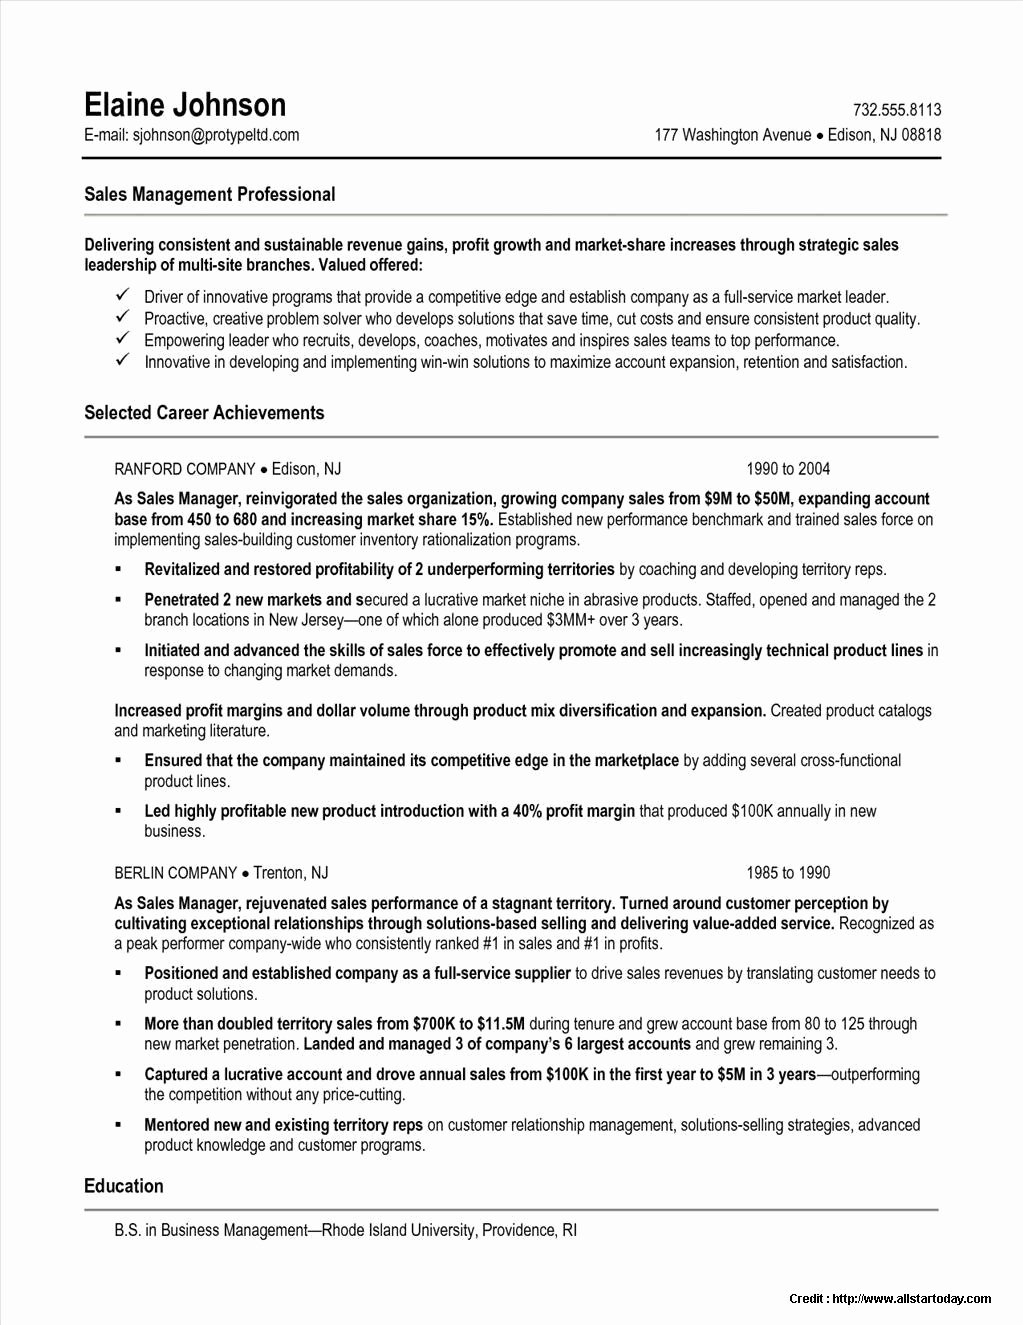 Sample Resumes for Sales Manager Resume Resume